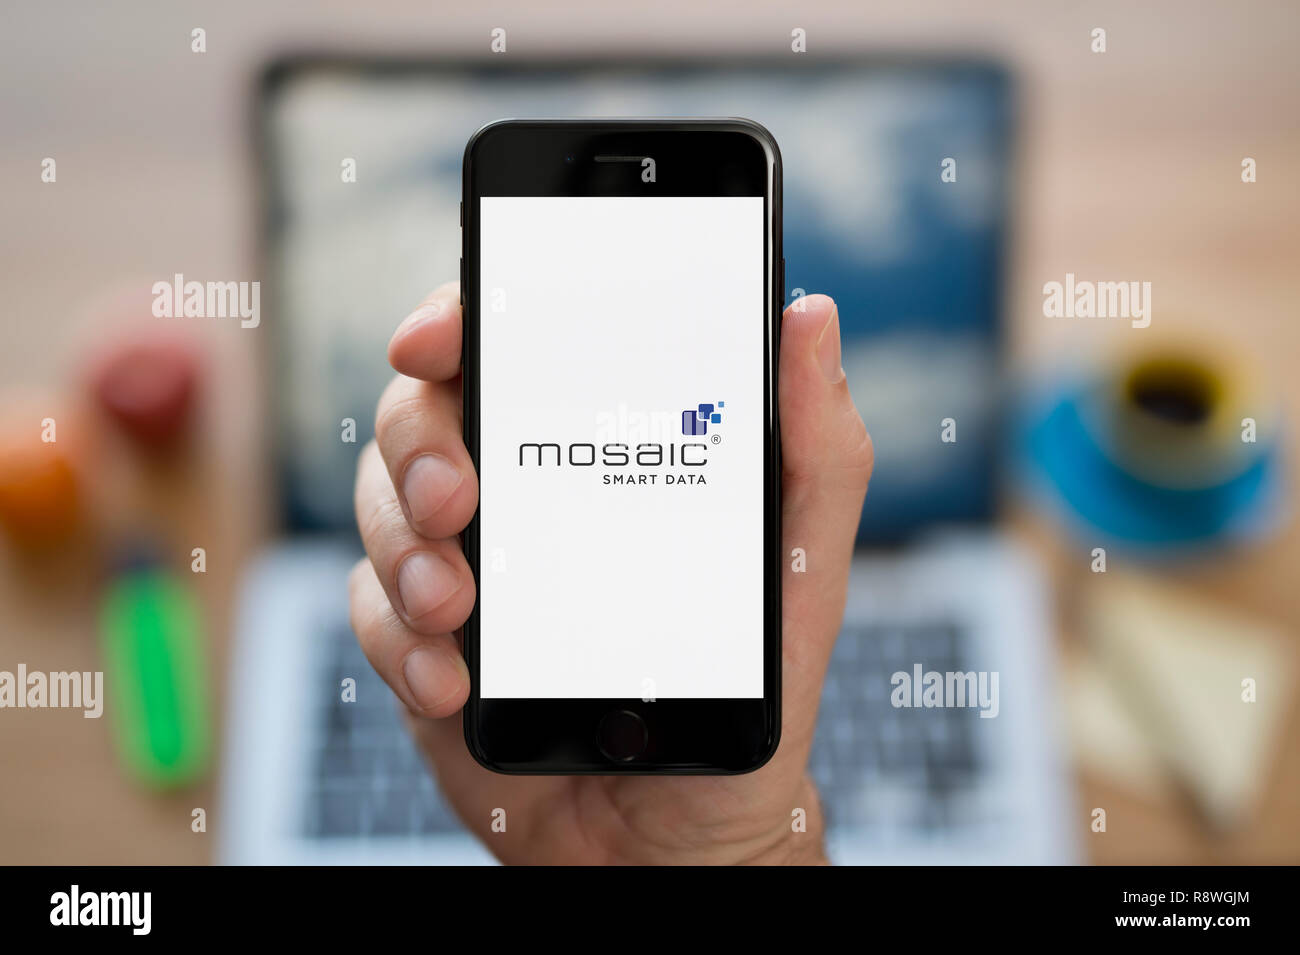 A man looks at his iPhone which displays the Mosaic Smart Data logo (Editorial use only). Stock Photo